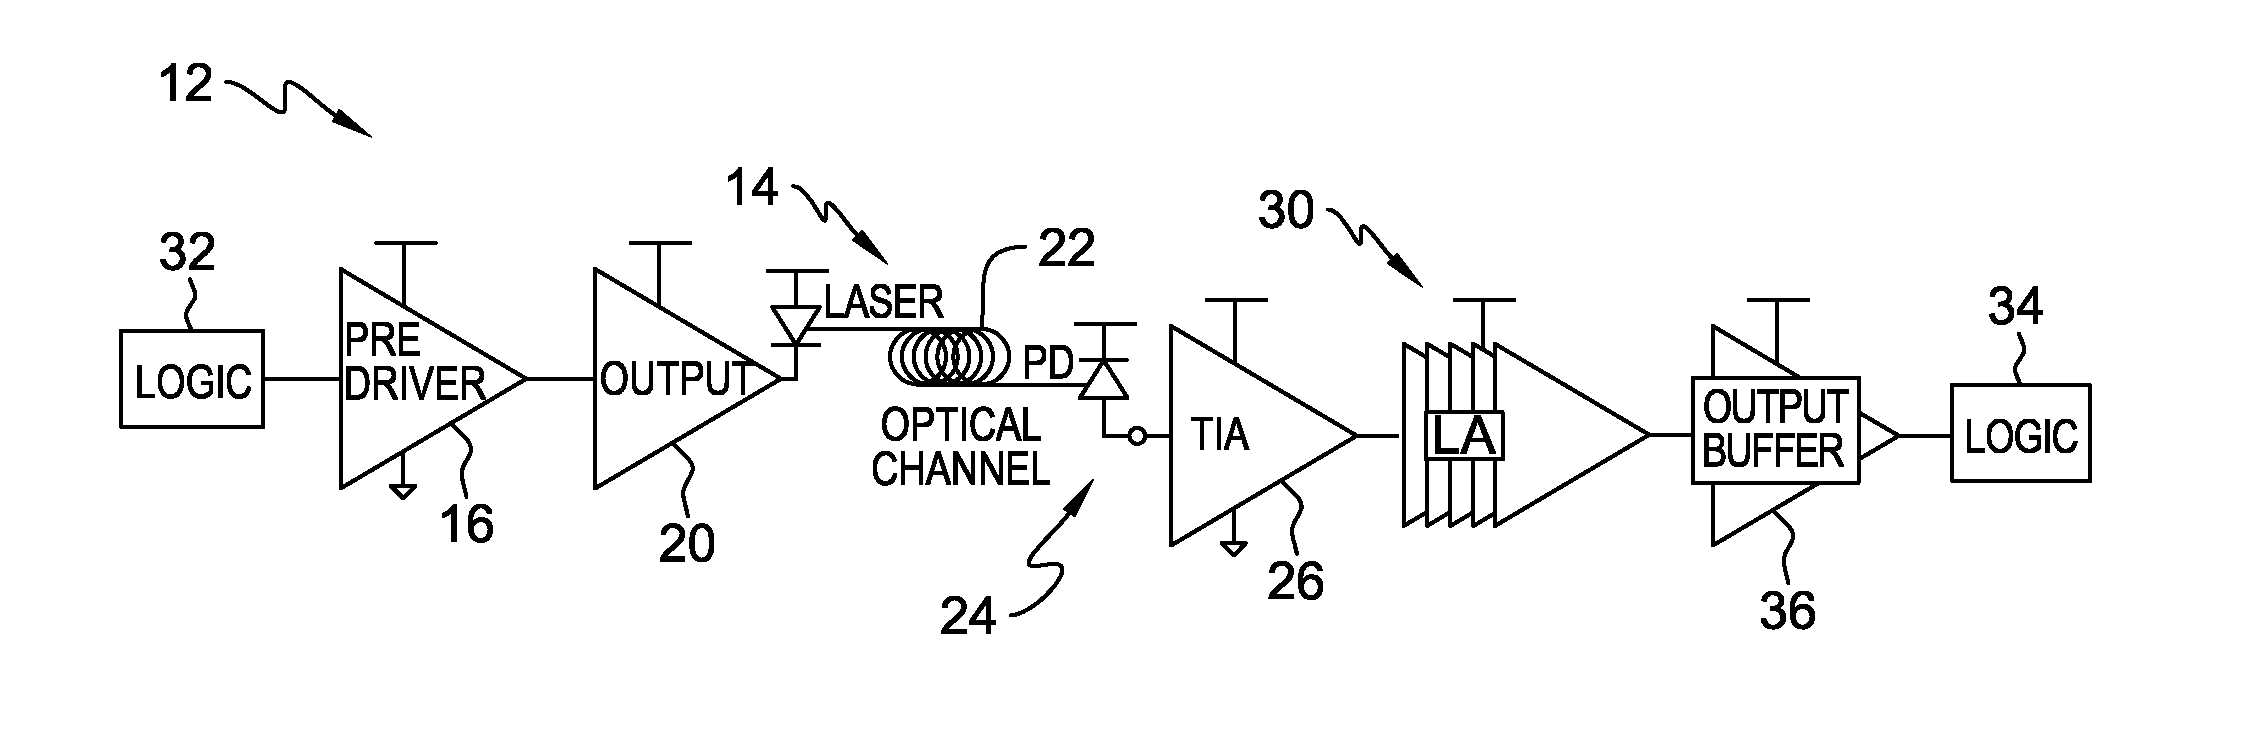 Optical interconnect using optical transmitter pre-distortion